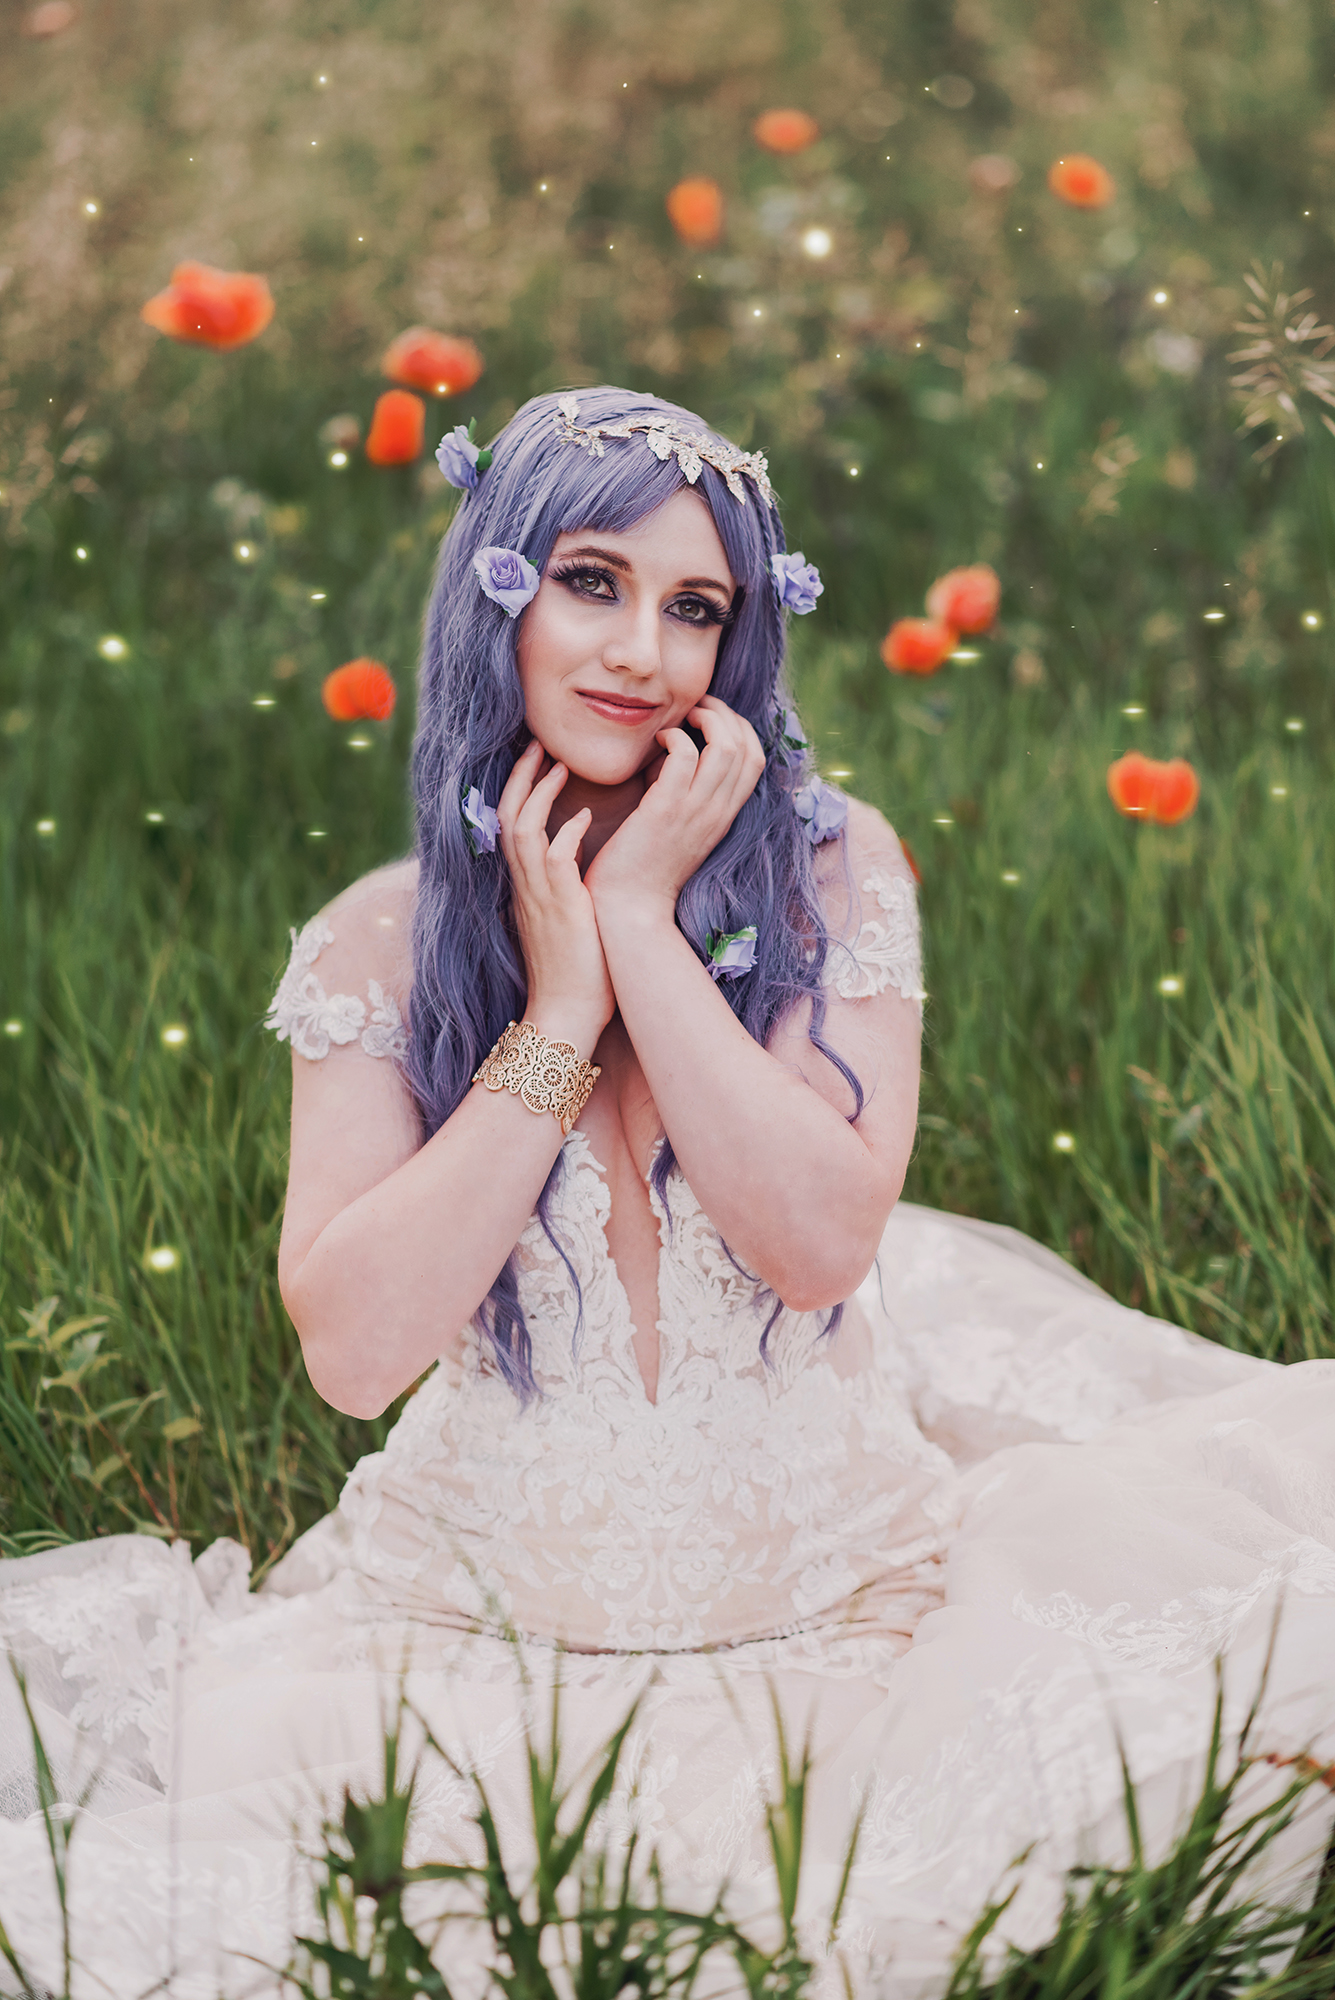 Fantasy portrait taken by Kendra Colleen Photography of a woman with purple hair sitting in a field of green grass and flowers wearing a white dress.